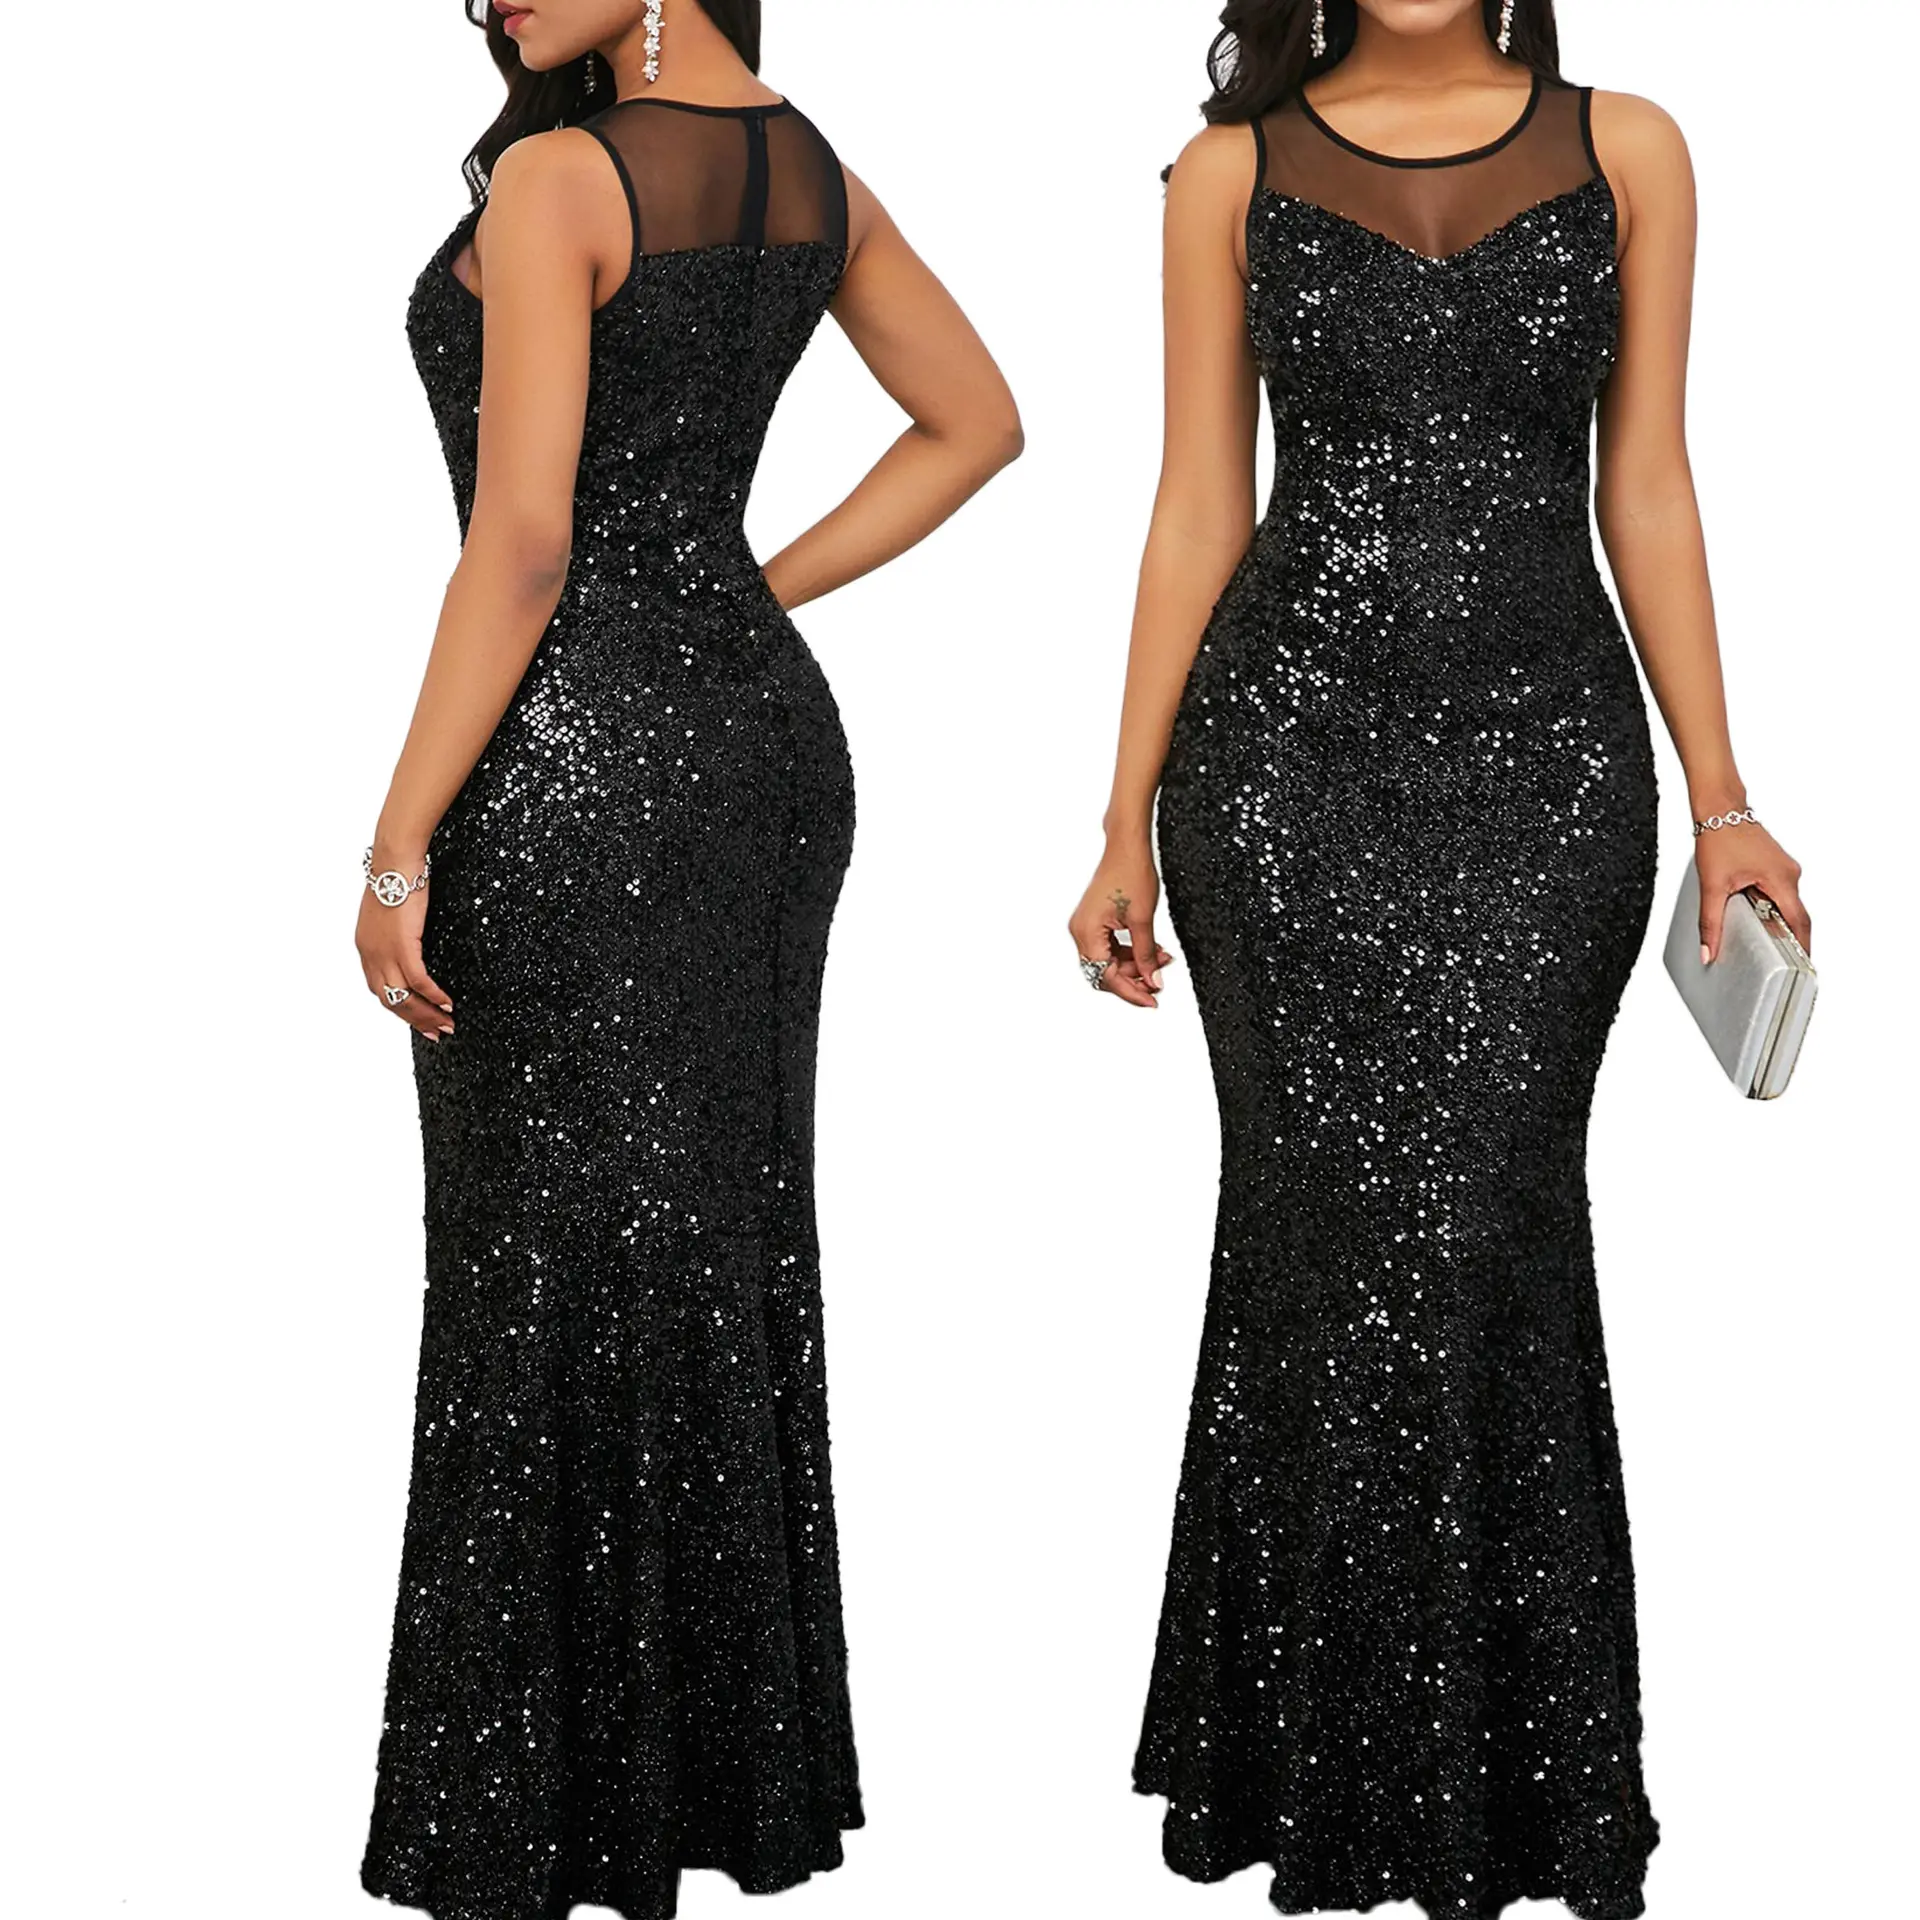 YQY1062 Customized Fashion Sleeveless Sequin Gowns Ladies Party Evening Dresses Women Elegant Casual Dresses